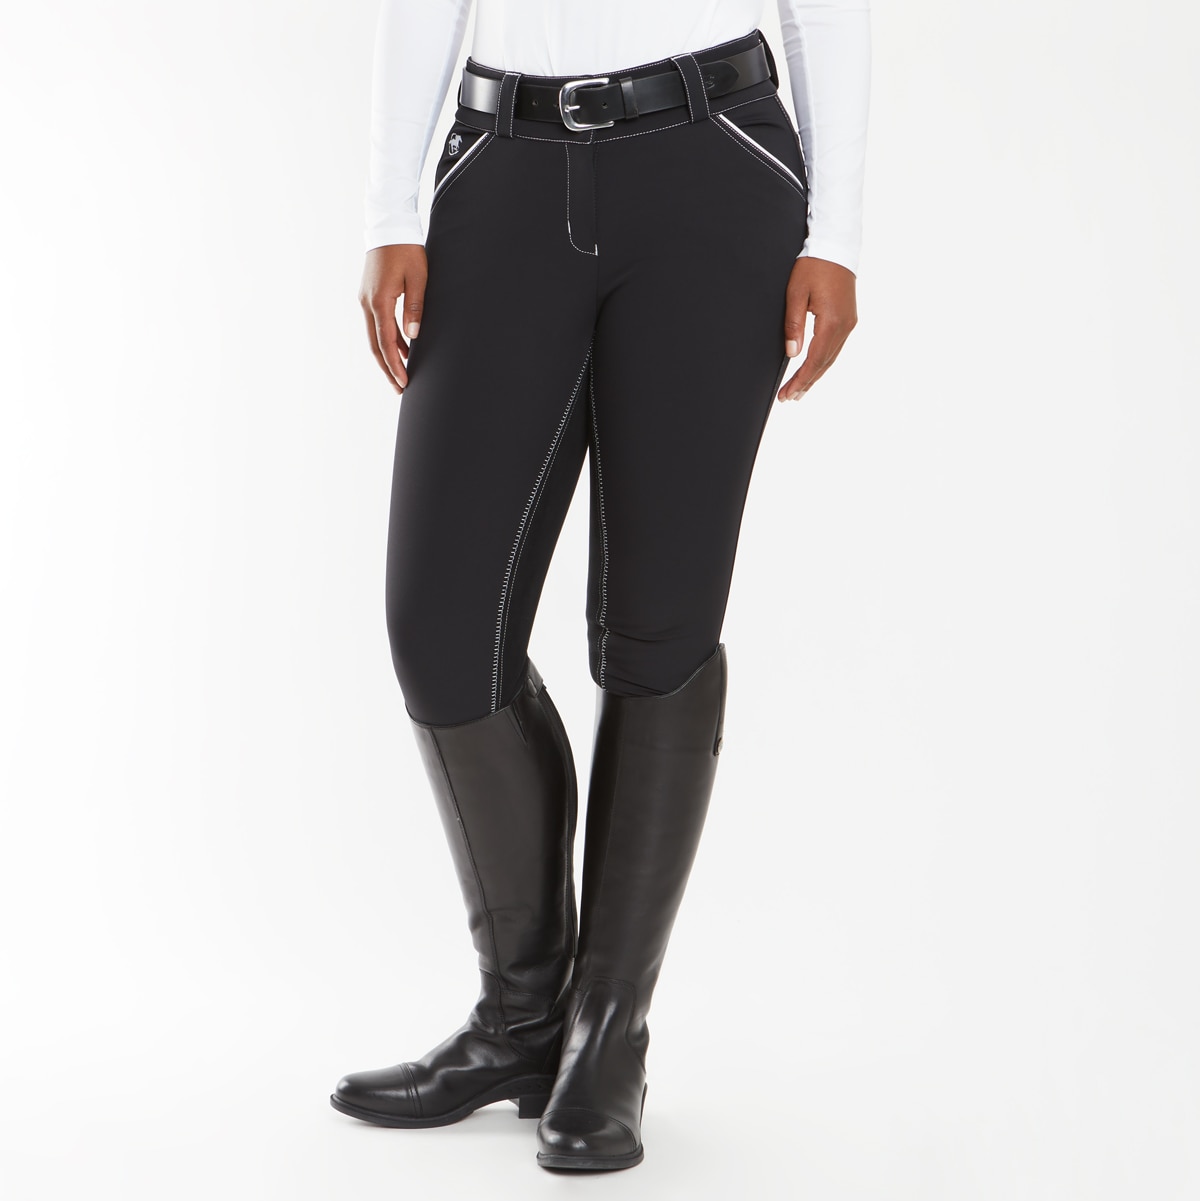 Evolution Full Seat Breeches - Black and Rose Gold